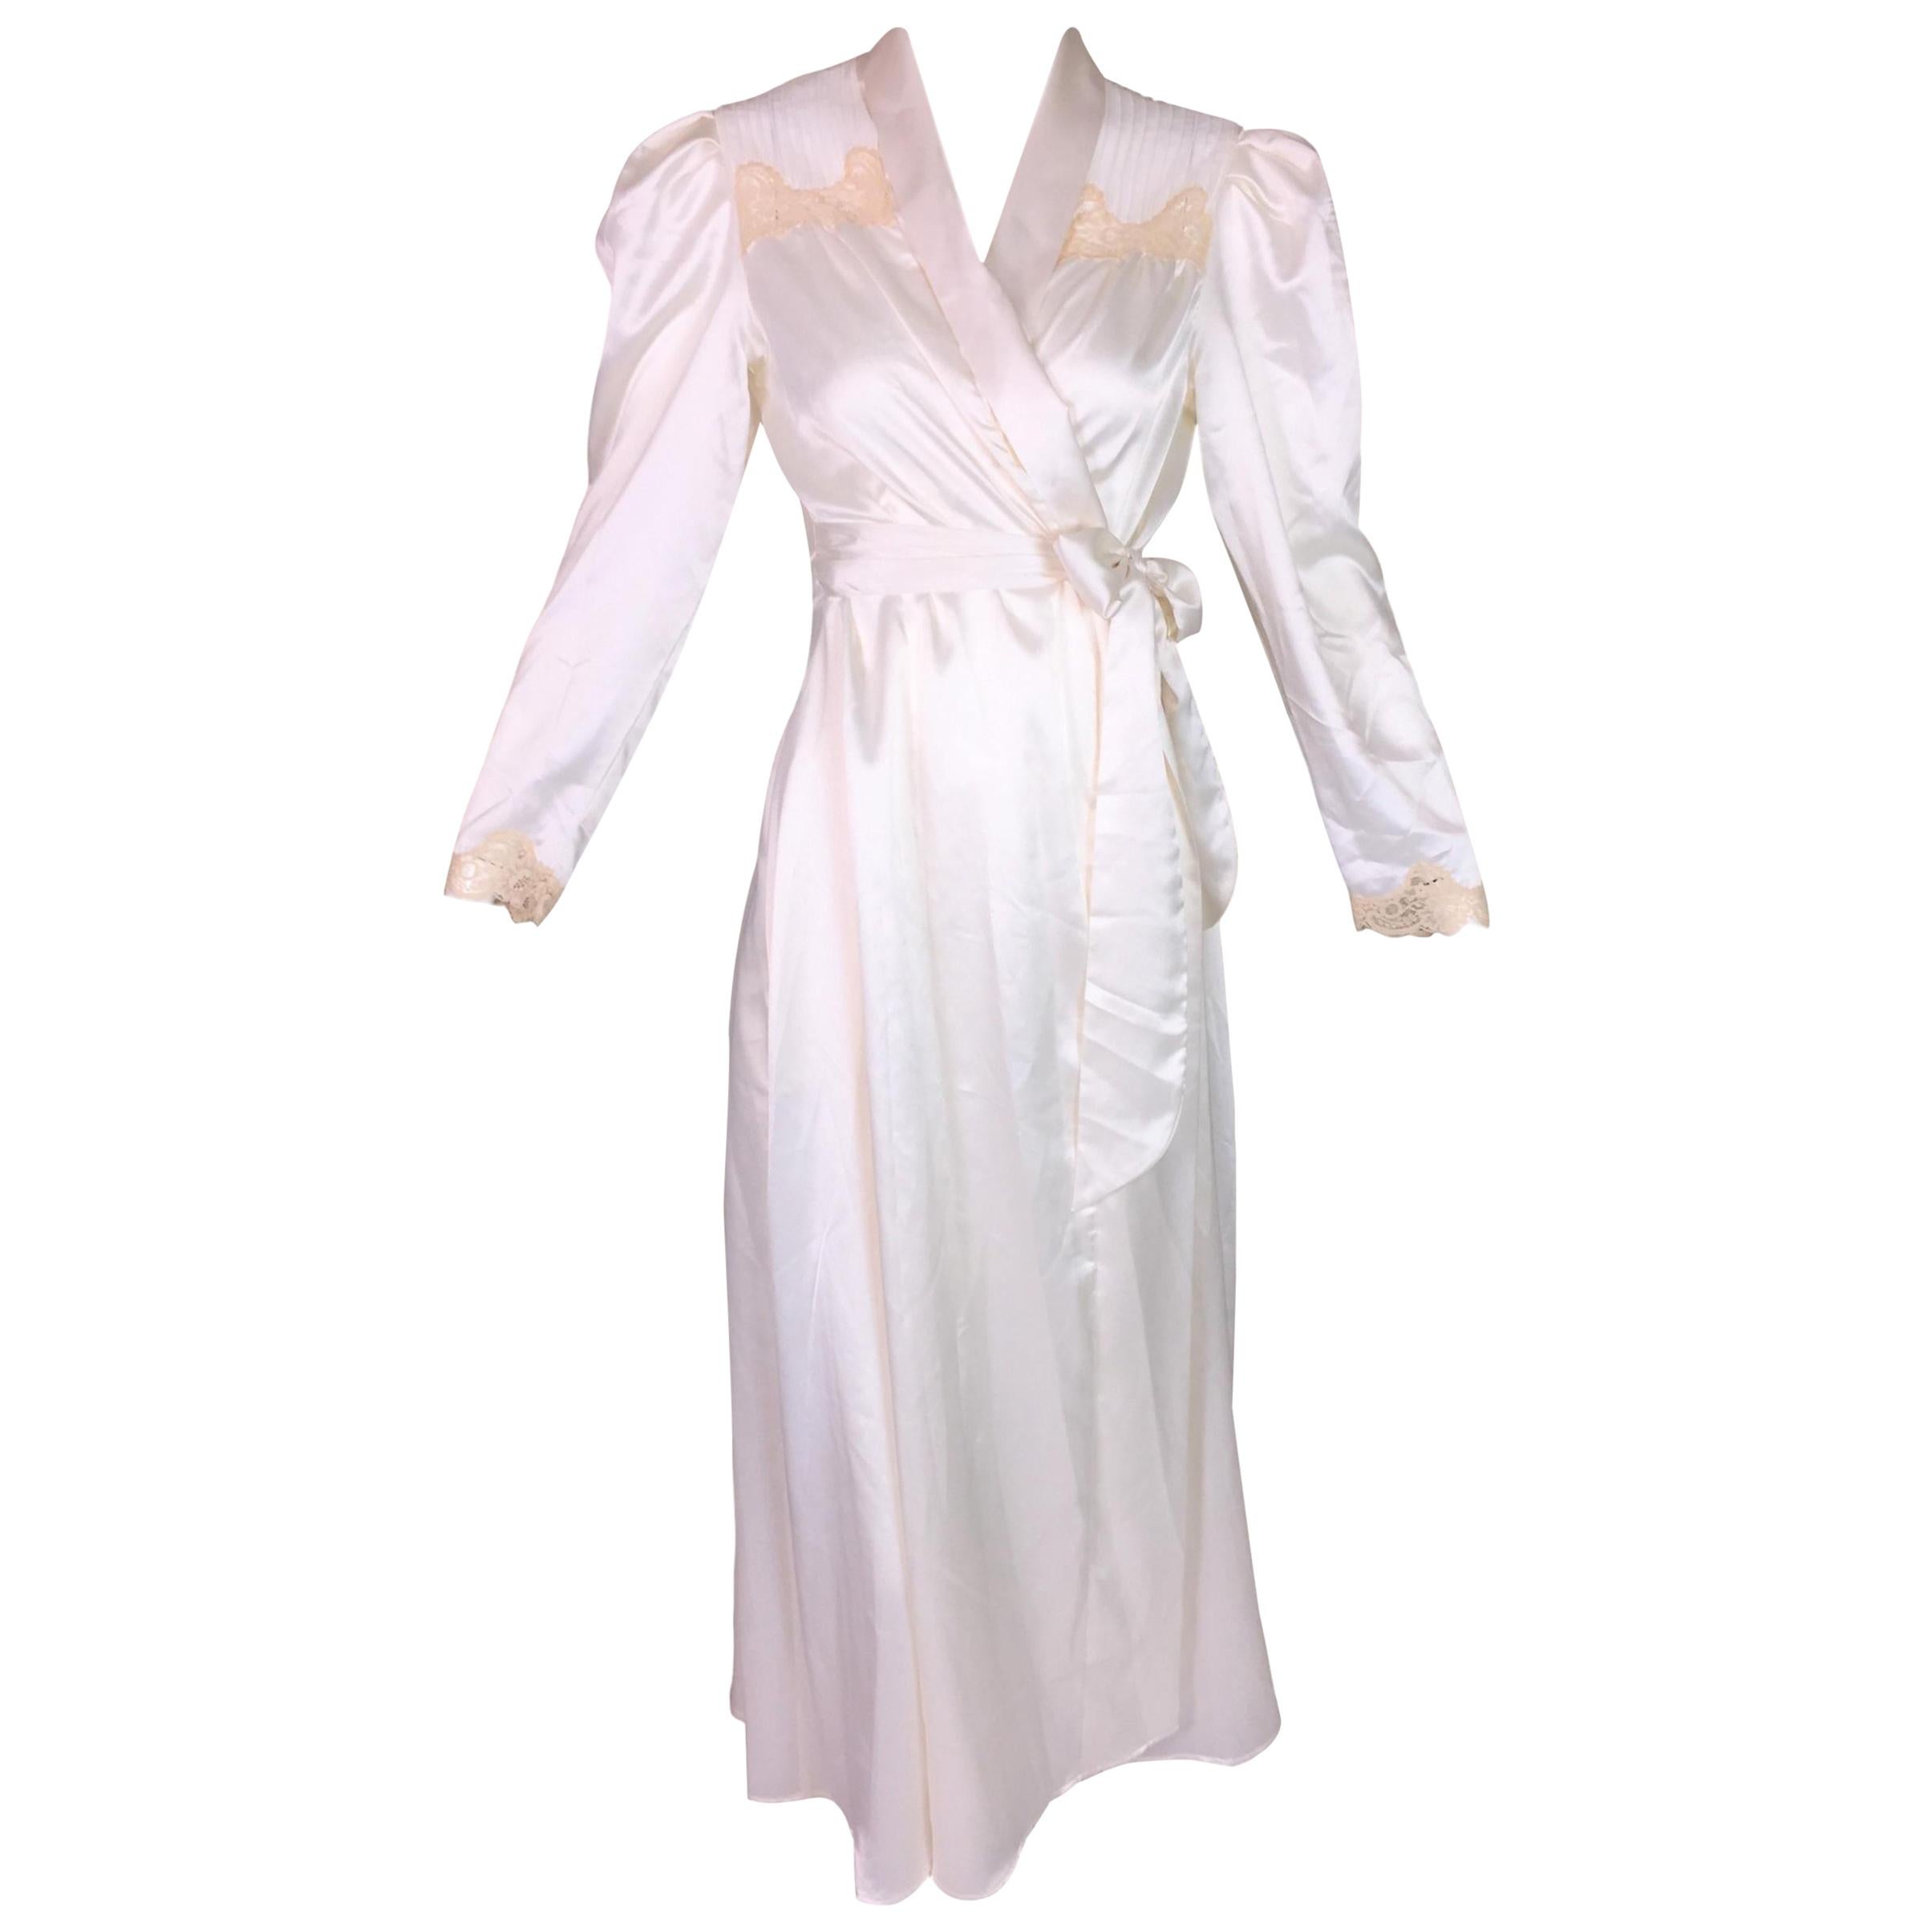 Christian Dior Ivory Satin 1940s Style Old Hollywood Robe Dress, 1970s 